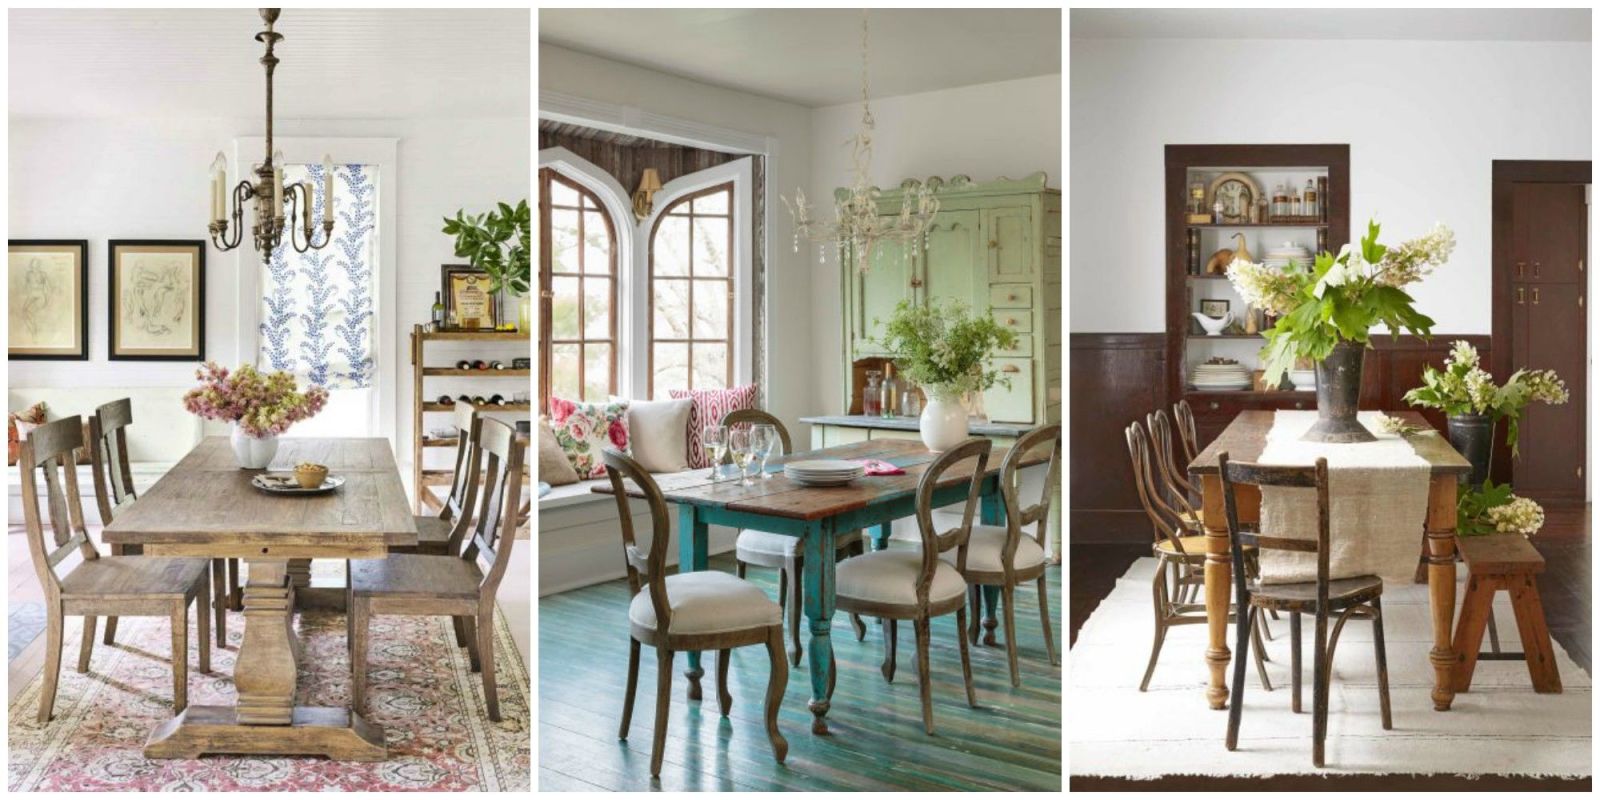 Where to buy dining room rugs